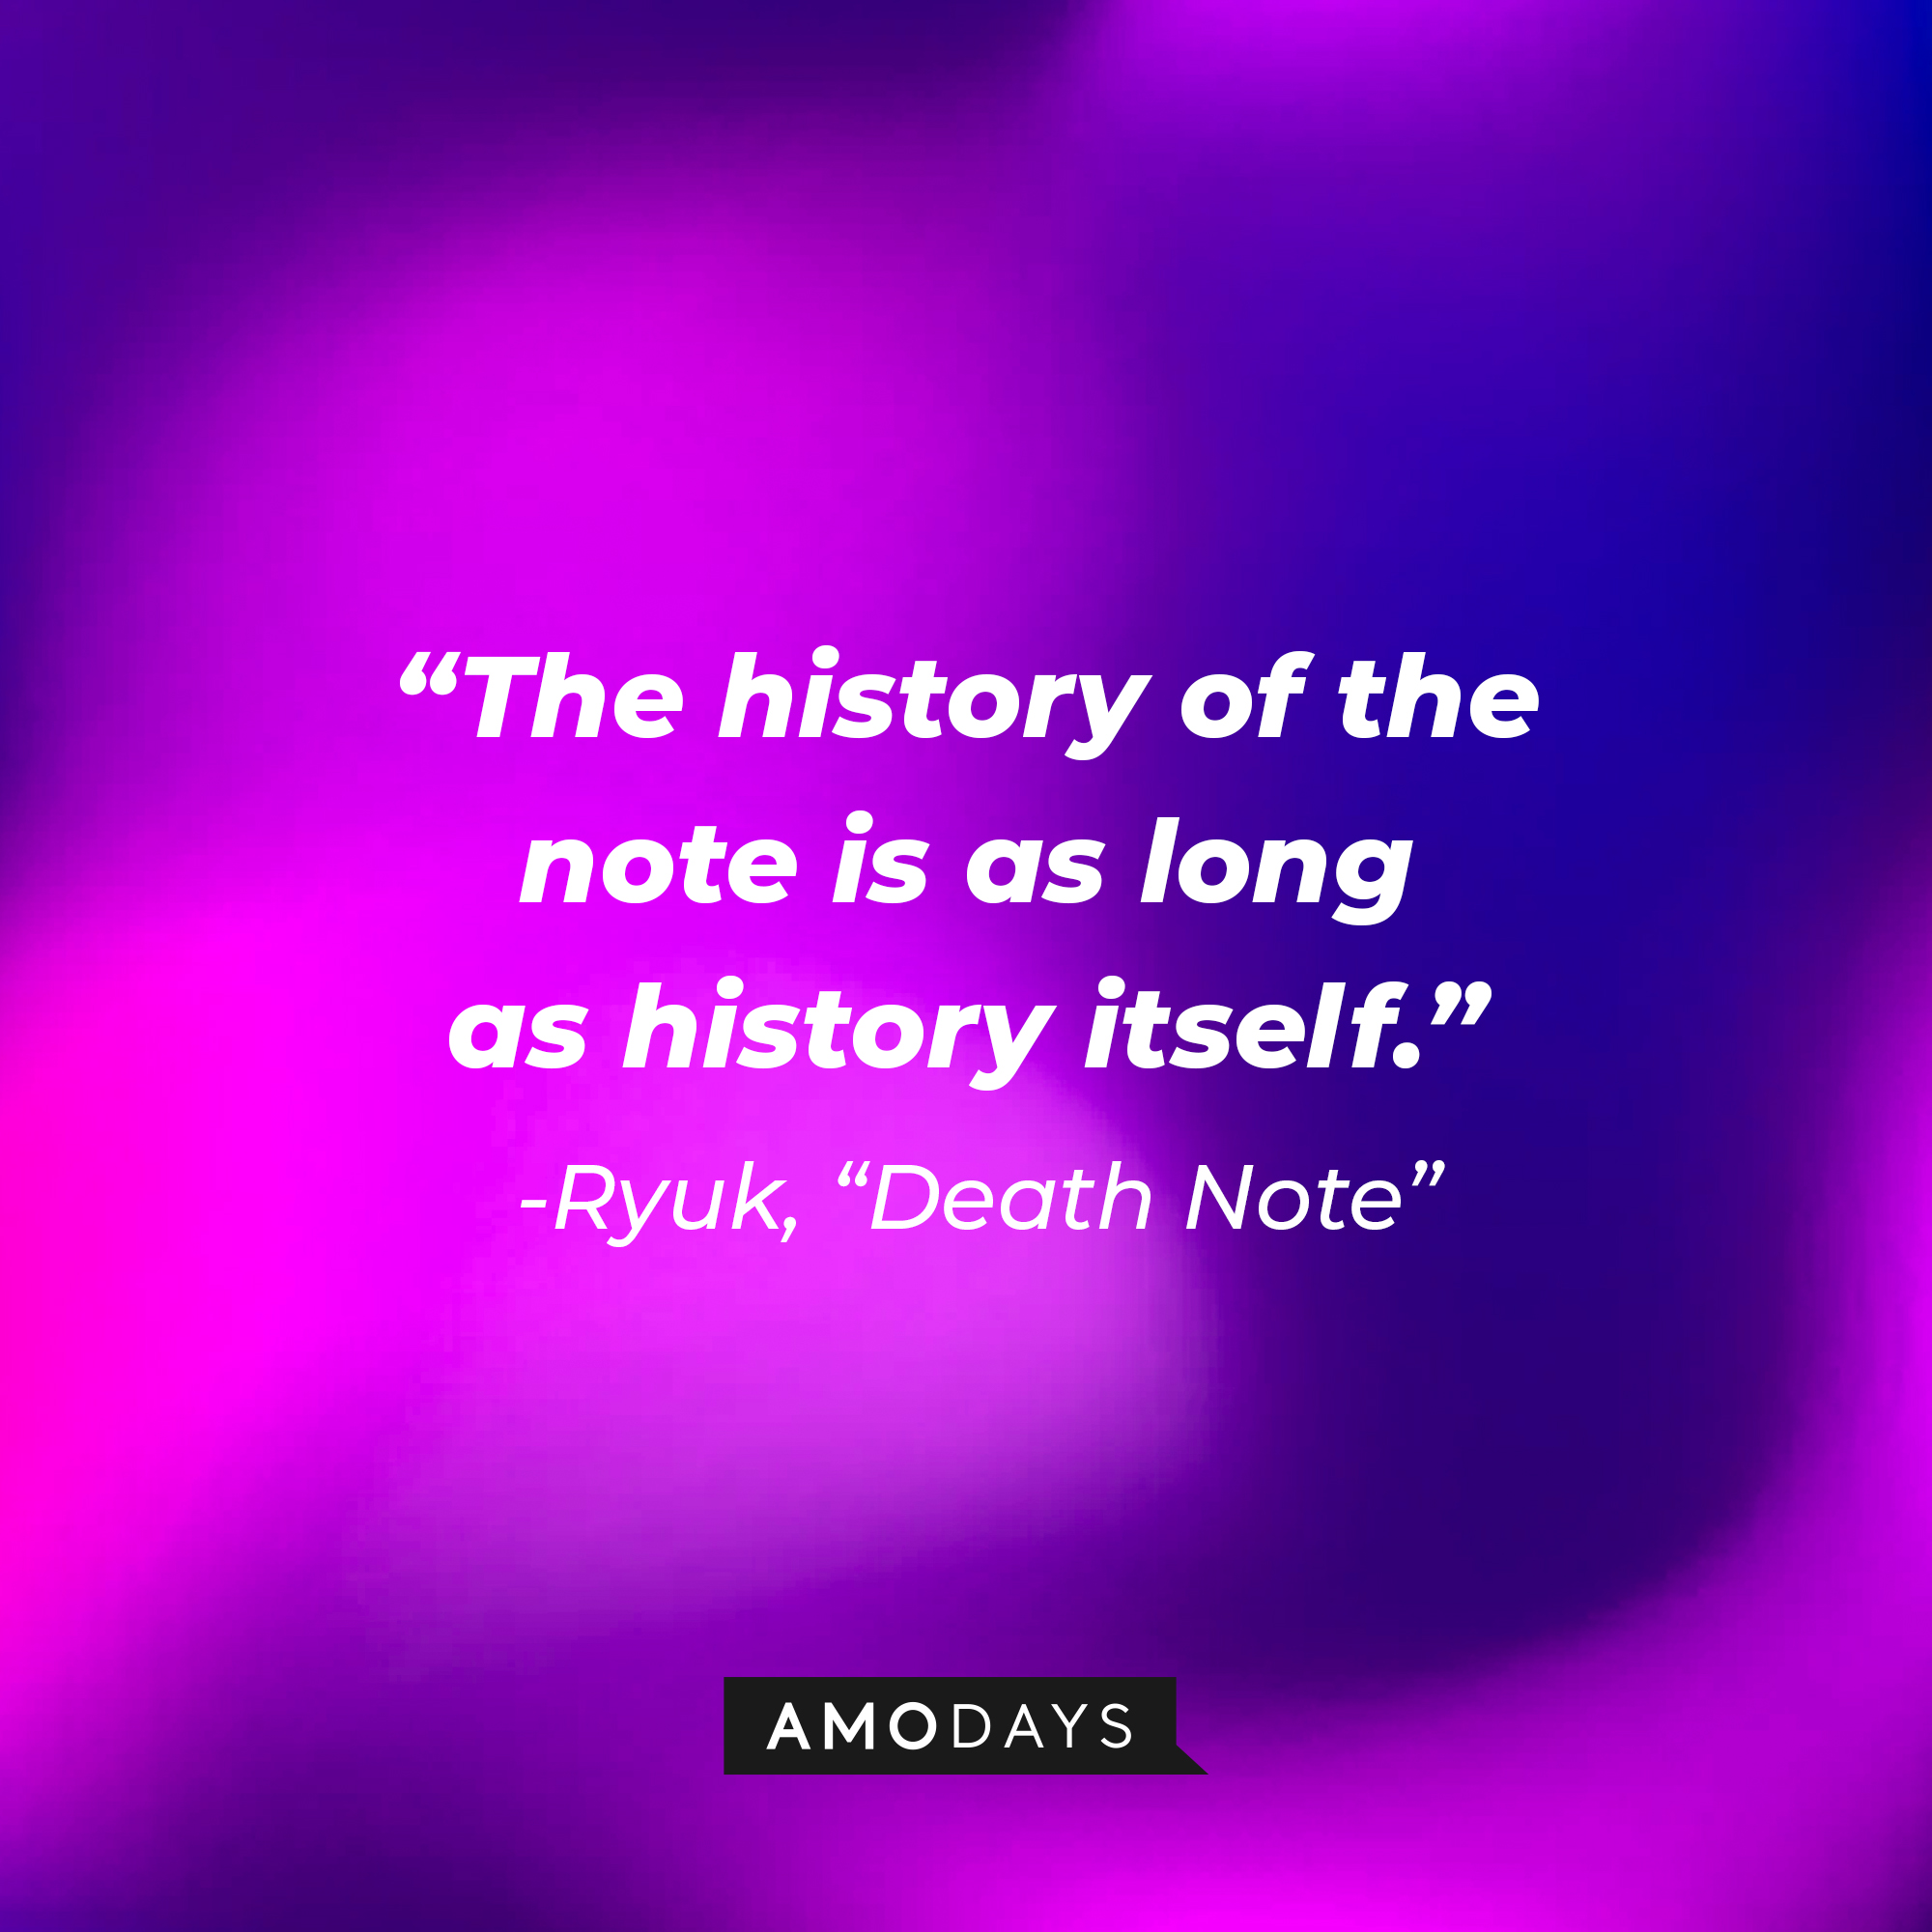 Ryuk's quote from "Death Note:" "The history of the note is as long as history itself." | Source: AmoDays